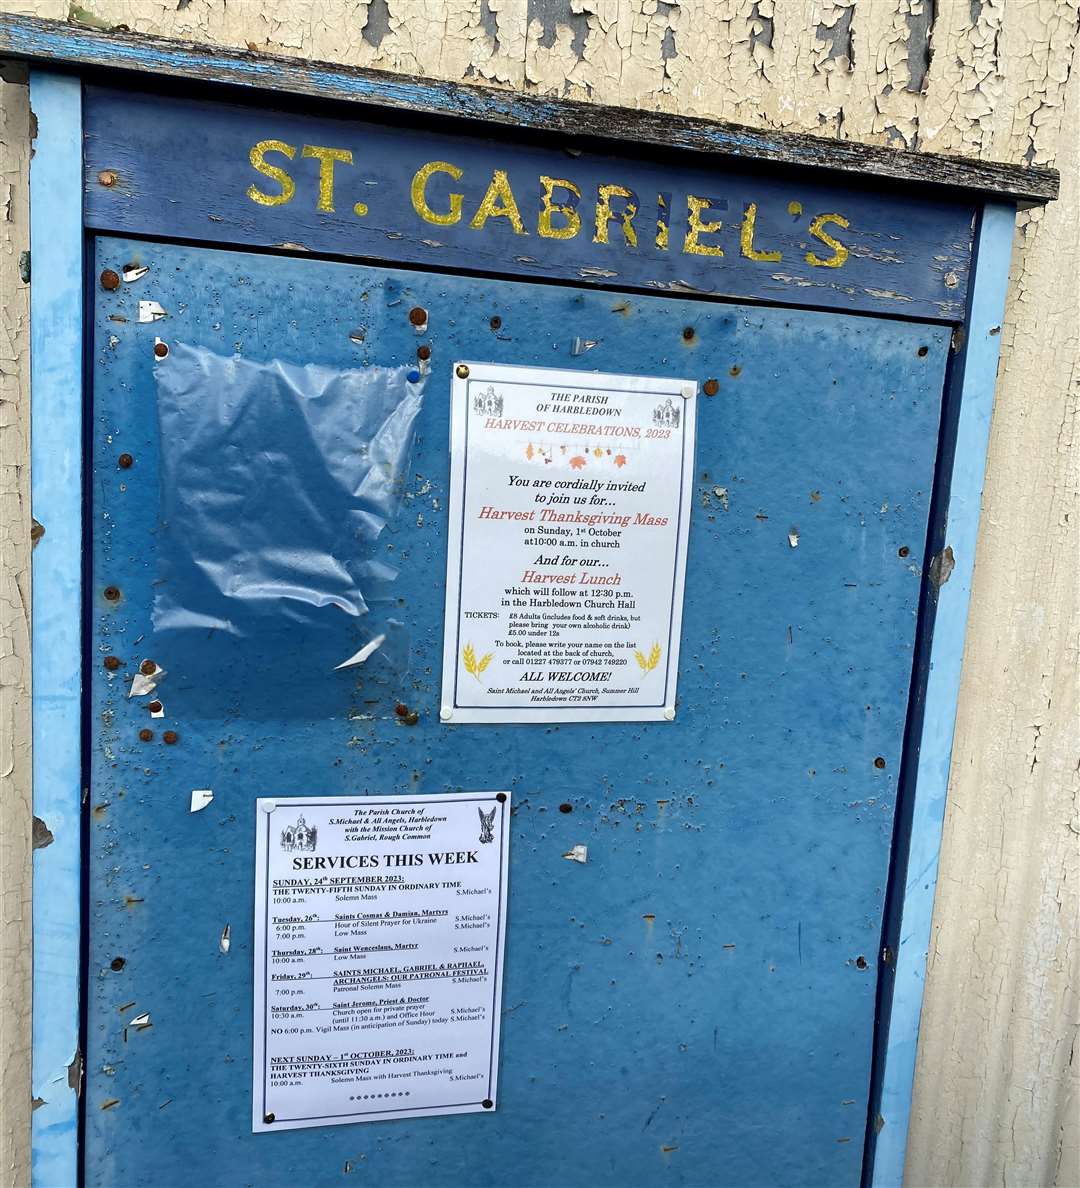 St Gabriels in Rough Common, Canterbury, has not held a service since March 2020